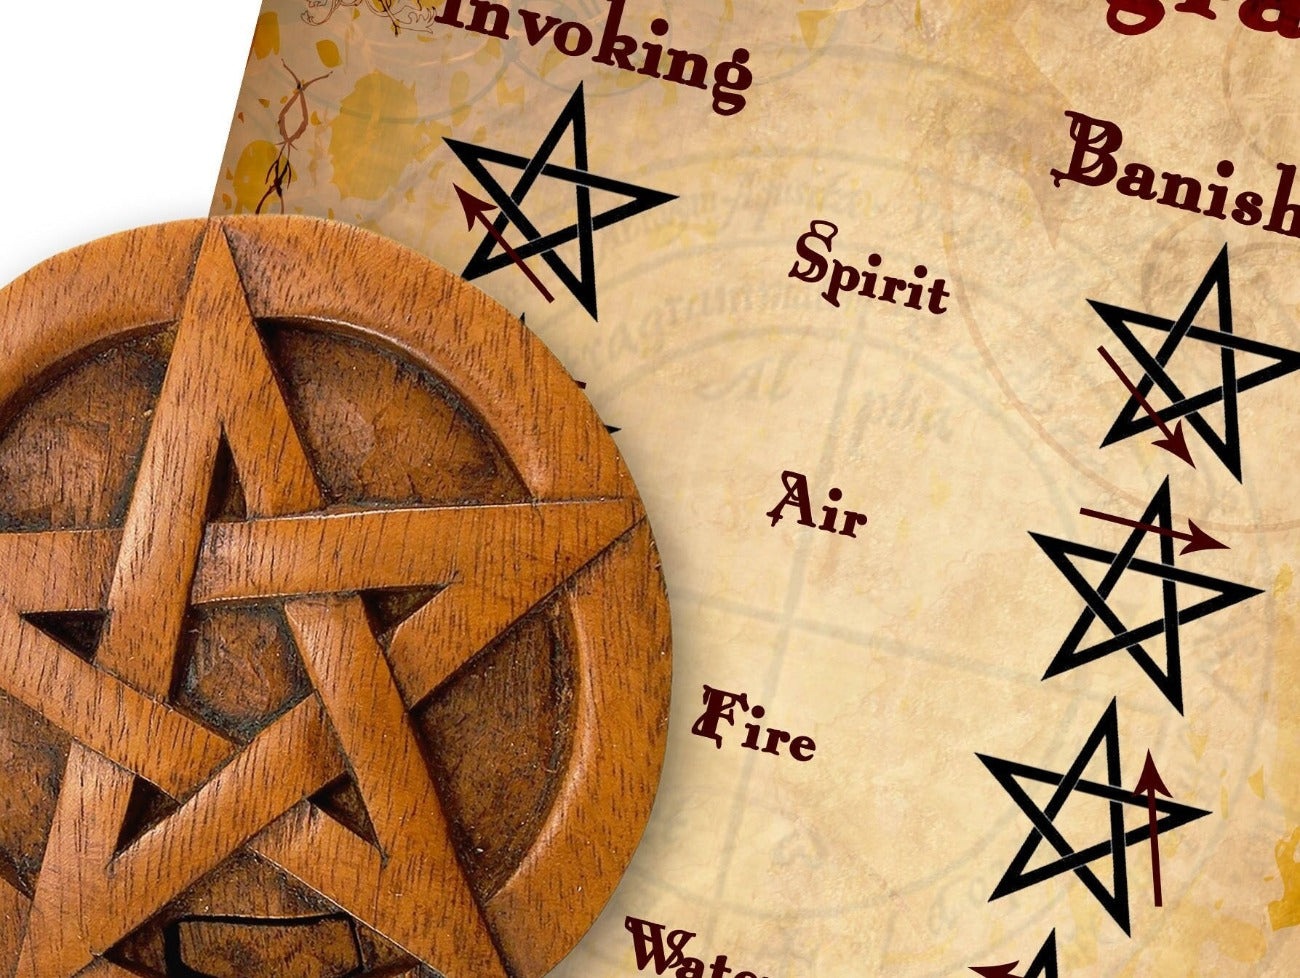 PENTAGRAM MAGIC, Witchcraft Invoking and Banishing Pentagrams Cheat Sheet, Wicca Pentacle Pentagram, Call the Quarters, Cast a Wicca Circle - Morgana Magick Spell